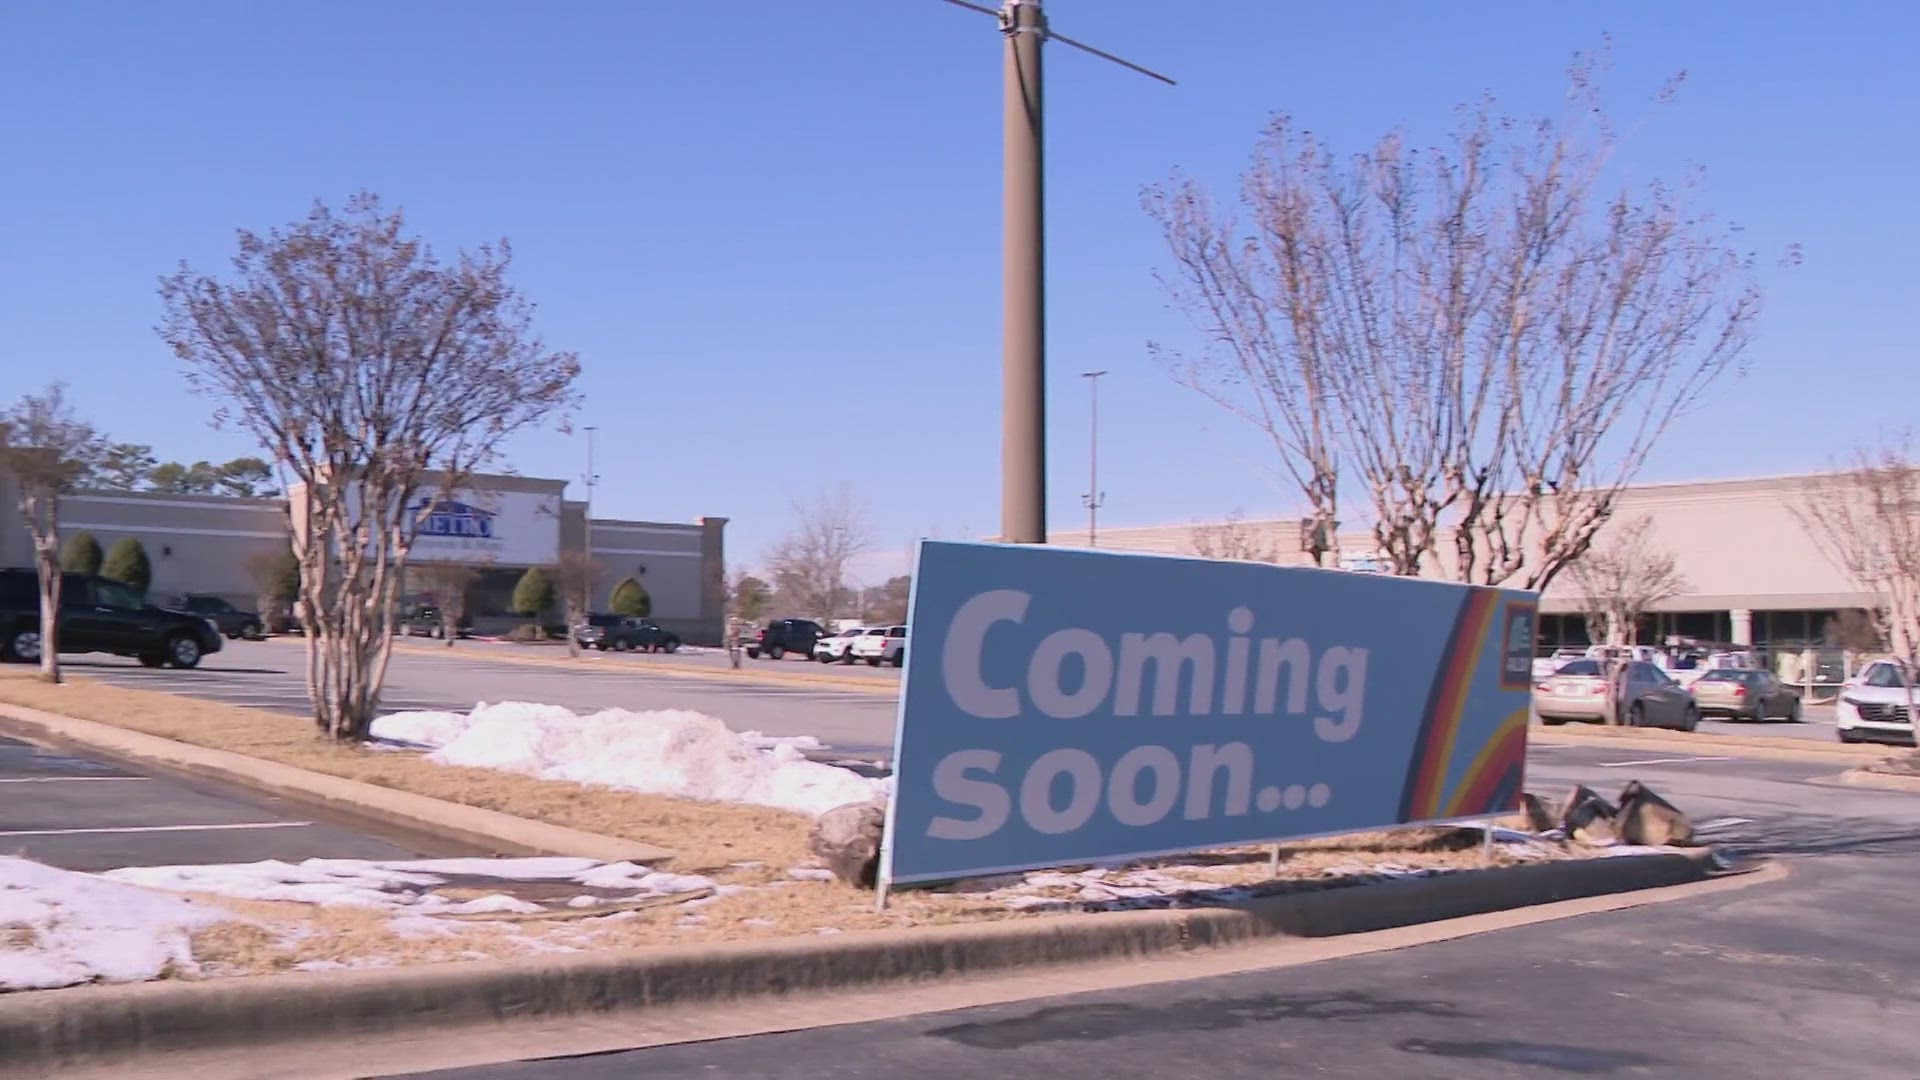 A new Aldi Food Market will be "coming soon" to Little Rock as an official sign was placed outside of the building this week.